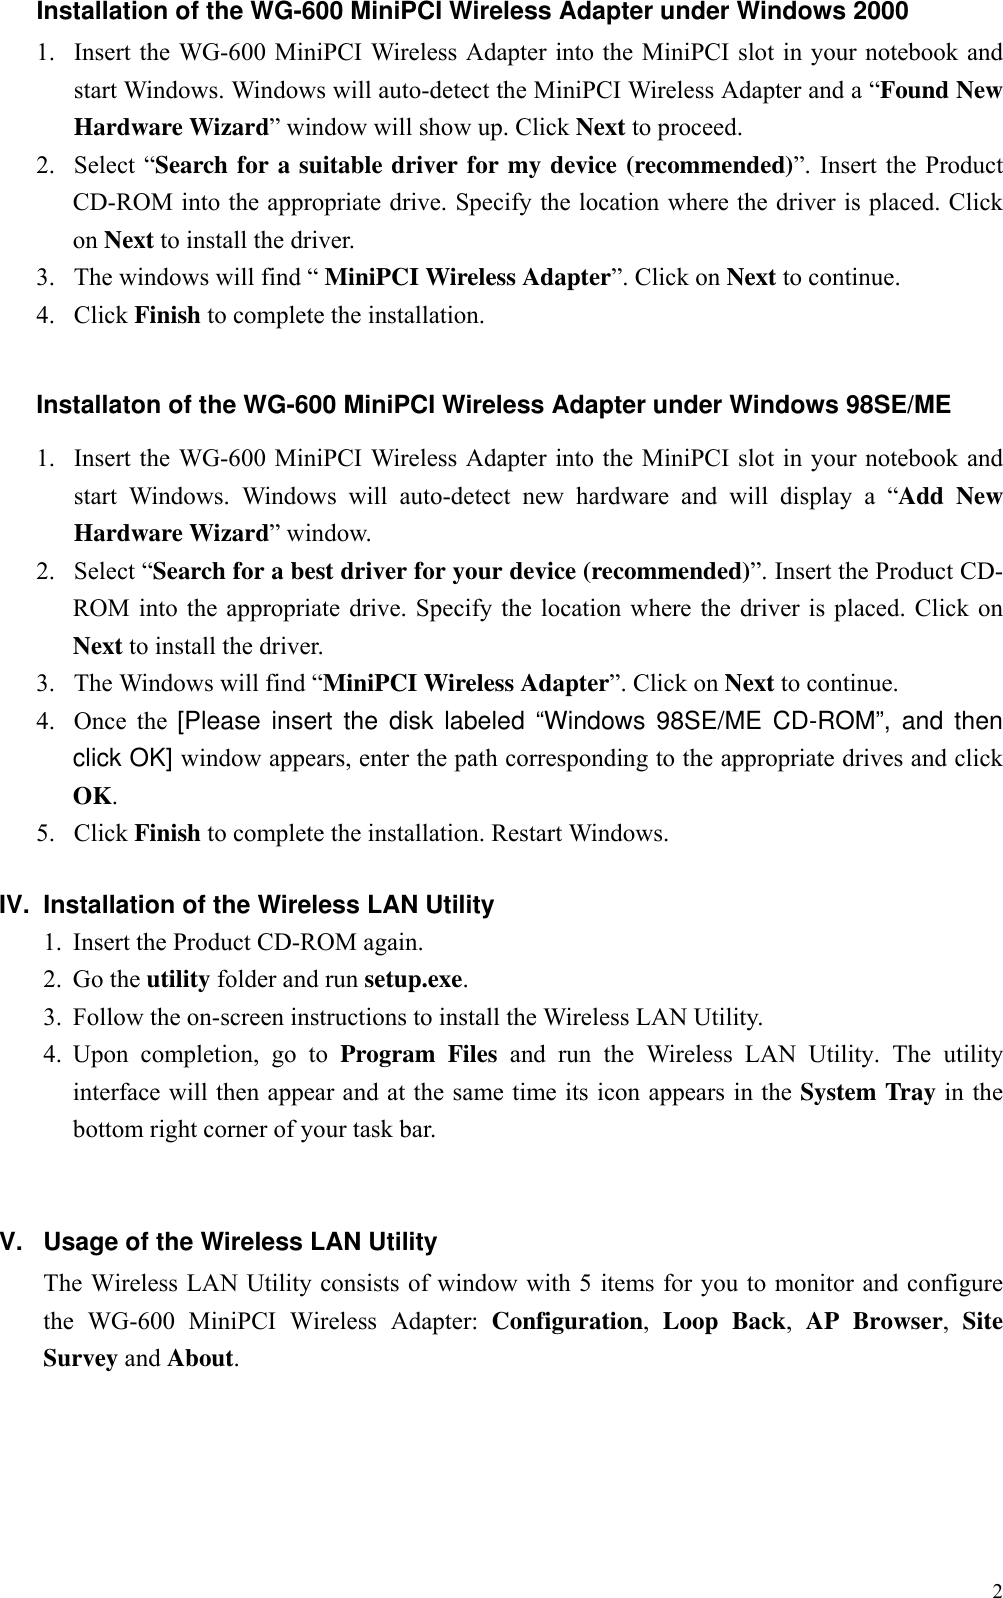 2Installation of the WG-600 MiniPCI Wireless Adapter under Windows 20001. Insert the WG-600 MiniPCI Wireless Adapter into the MiniPCI slot in your notebook andstart Windows. Windows will auto-detect the MiniPCI Wireless Adapter and a “Found NewHardware Wizard” window will show up. Click Next to proceed.2. Select “Search for a suitable driver for my device (recommended)”. Insert the ProductCD-ROM into the appropriate drive. Specify the location where the driver is placed. Clickon Next to install the driver.3. The windows will find “ MiniPCI Wireless Adapter”. Click on Next to continue.4. Click Finish to complete the installation.Installaton of the WG-600 MiniPCI Wireless Adapter under Windows 98SE/ME1. Insert the WG-600 MiniPCI Wireless Adapter into the MiniPCI slot in your notebook andstart Windows. Windows will auto-detect new hardware and will display a “Add NewHardware Wizard” window.2. Select “Search for a best driver for your device (recommended)”. Insert the Product CD-ROM into the appropriate drive. Specify the location where the driver is placed. Click onNext to install the driver.3. The Windows will find “MiniPCI Wireless Adapter”. Click on Next to continue.4. Once the [Please insert the disk labeled “Windows 98SE/ME CD-ROM”, and thenclick OK] window appears, enter the path corresponding to the appropriate drives and clickOK.5. Click Finish to complete the installation. Restart Windows.IV.  Installation of the Wireless LAN Utility1. Insert the Product CD-ROM again.2. Go the utility folder and run setup.exe.3. Follow the on-screen instructions to install the Wireless LAN Utility.4. Upon completion, go to Program Files and run the Wireless LAN Utility. The utilityinterface will then appear and at the same time its icon appears in the System Tray in thebottom right corner of your task bar.V.  Usage of the Wireless LAN UtilityThe Wireless LAN Utility consists of window with 5 items for you to monitor and configurethe WG-600 MiniPCI Wireless Adapter: Configuration,  Loop Back,  AP Browser,  SiteSurvey and About.